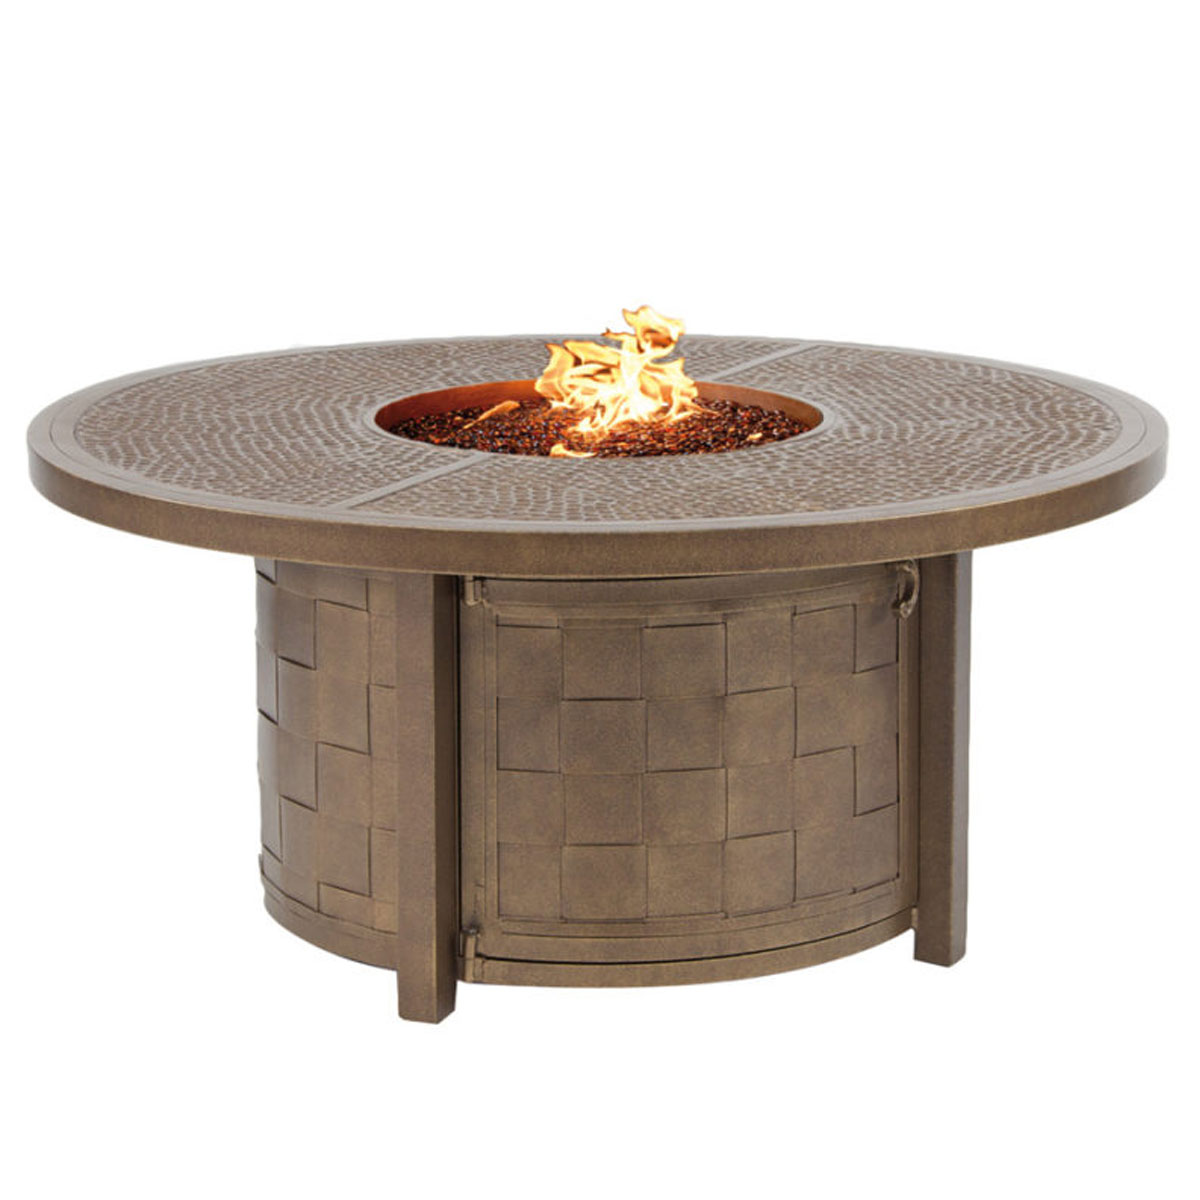 Castelle 49 inch Classical Round Firepit Coffee Table